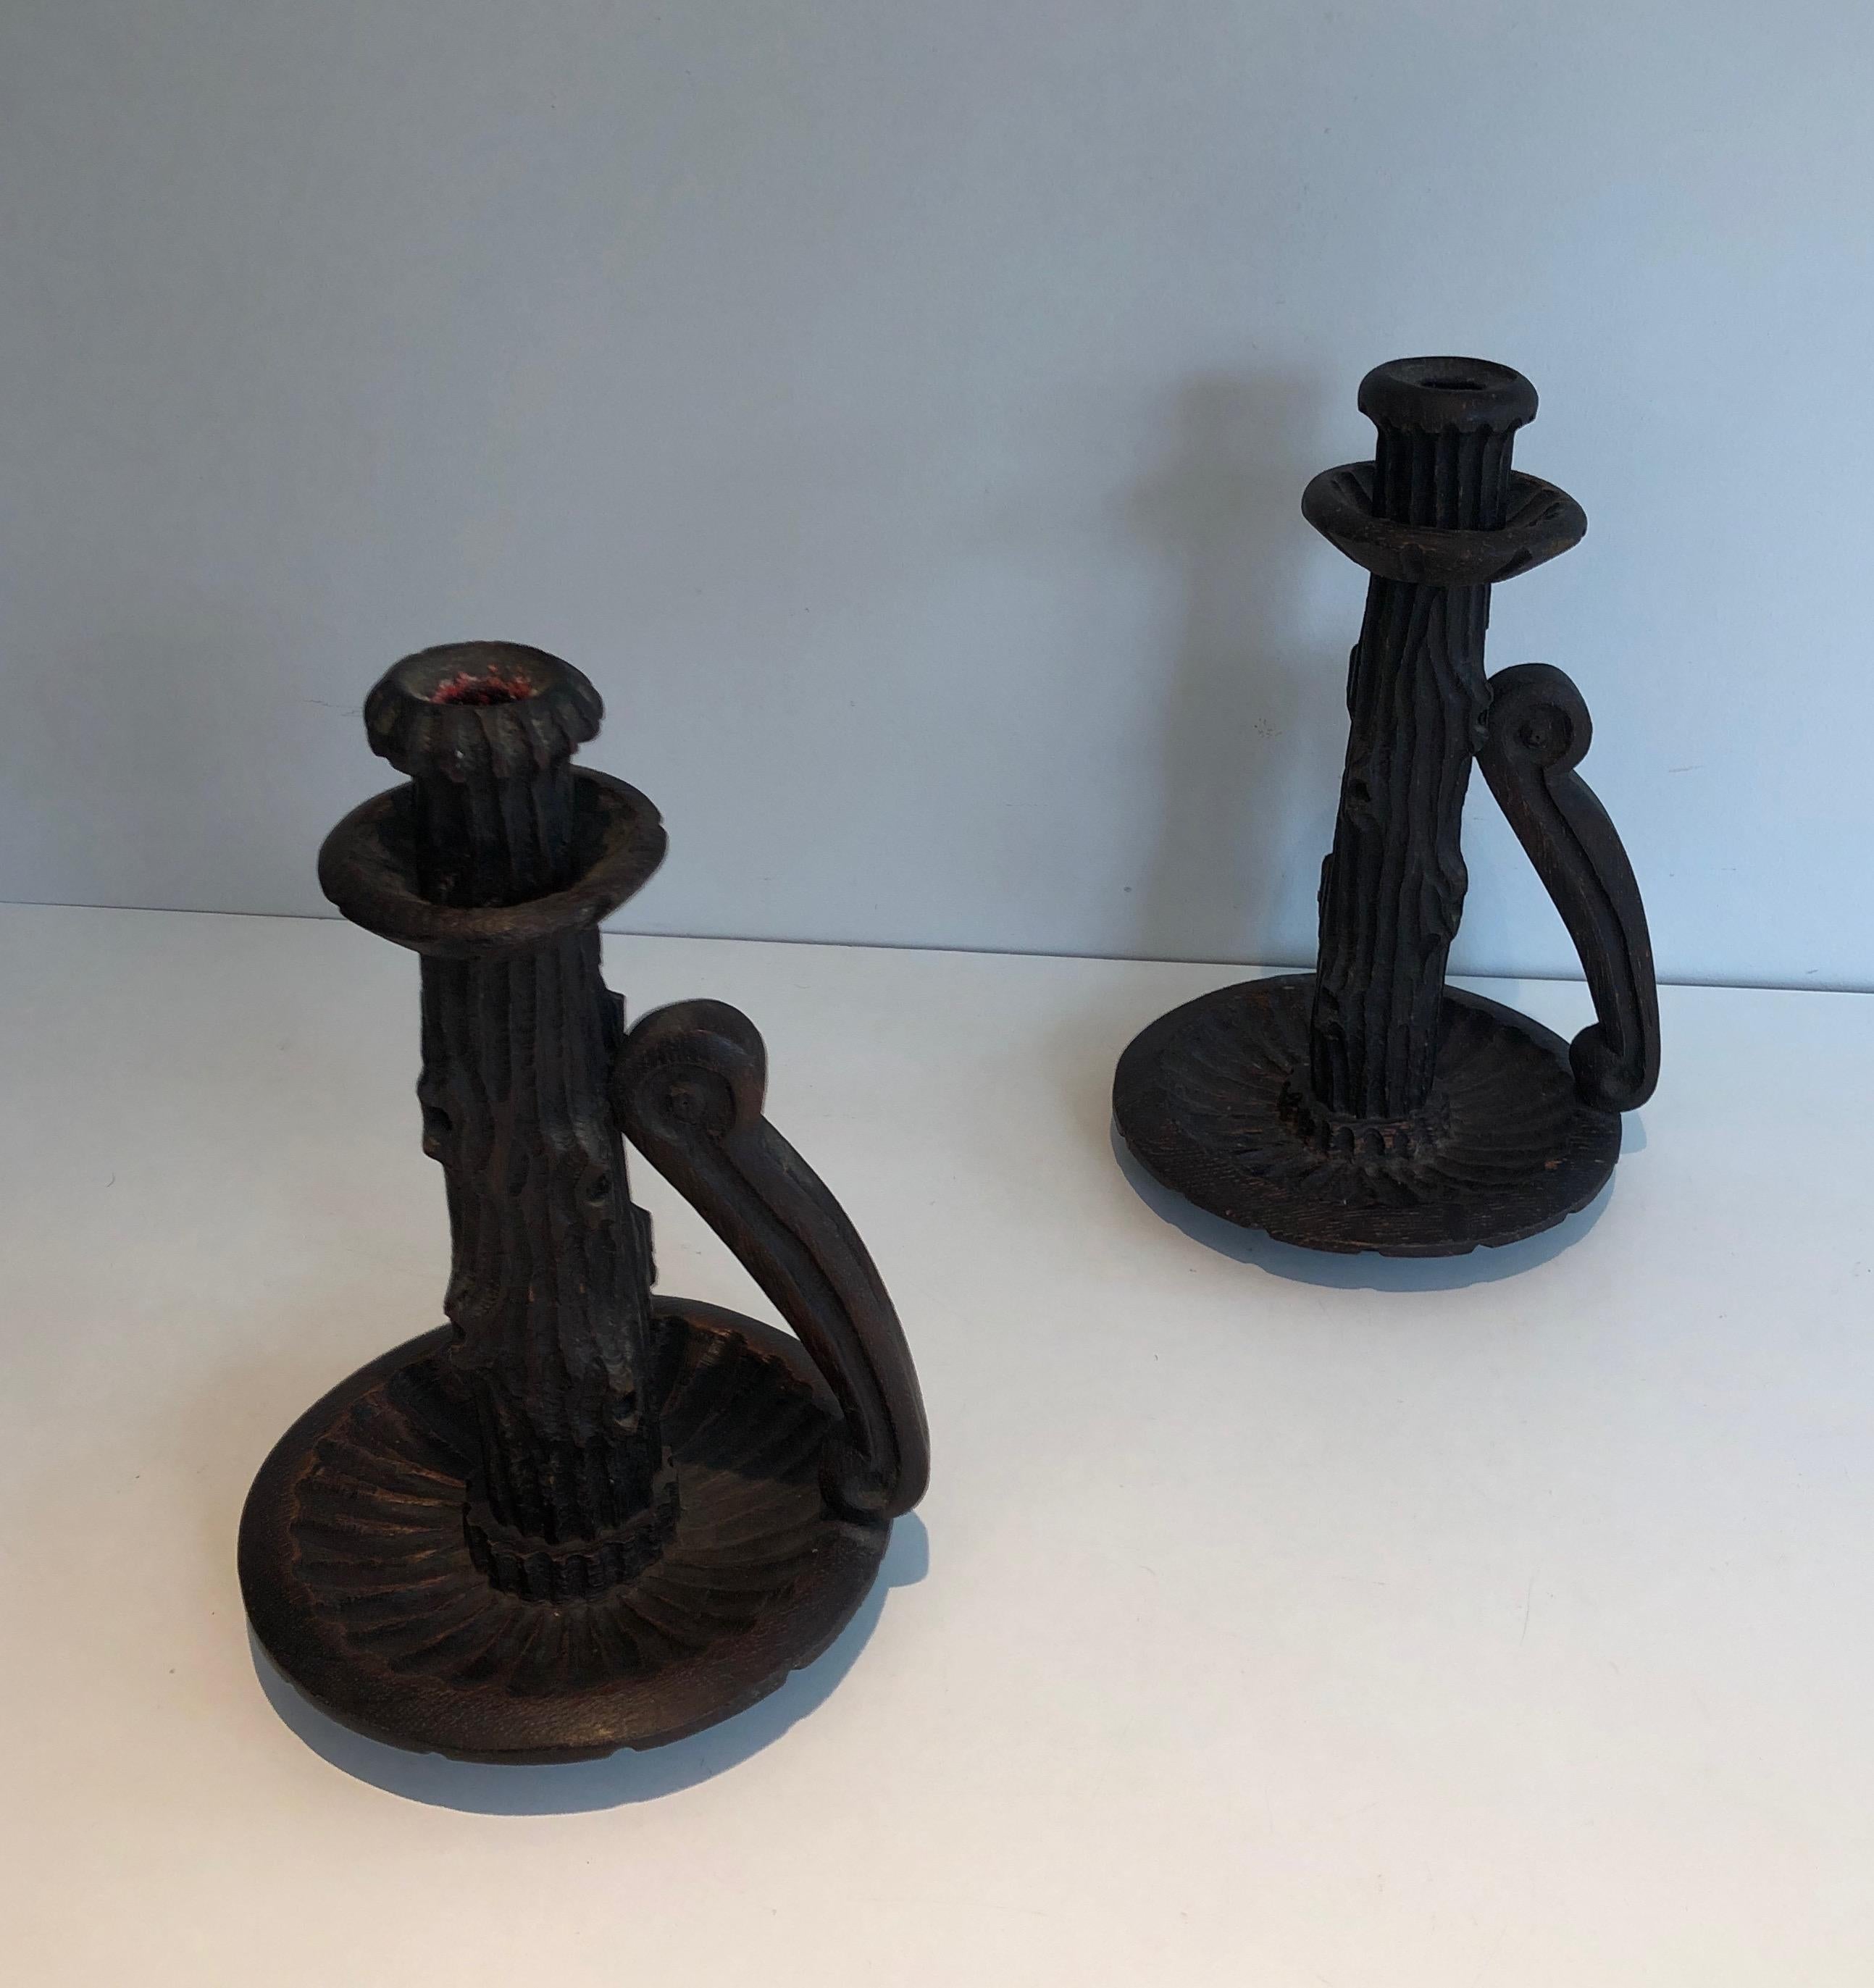 Pair of Tall Brutalist Candle Holders Made of Carved Wood, French, circa 1950 For Sale 16